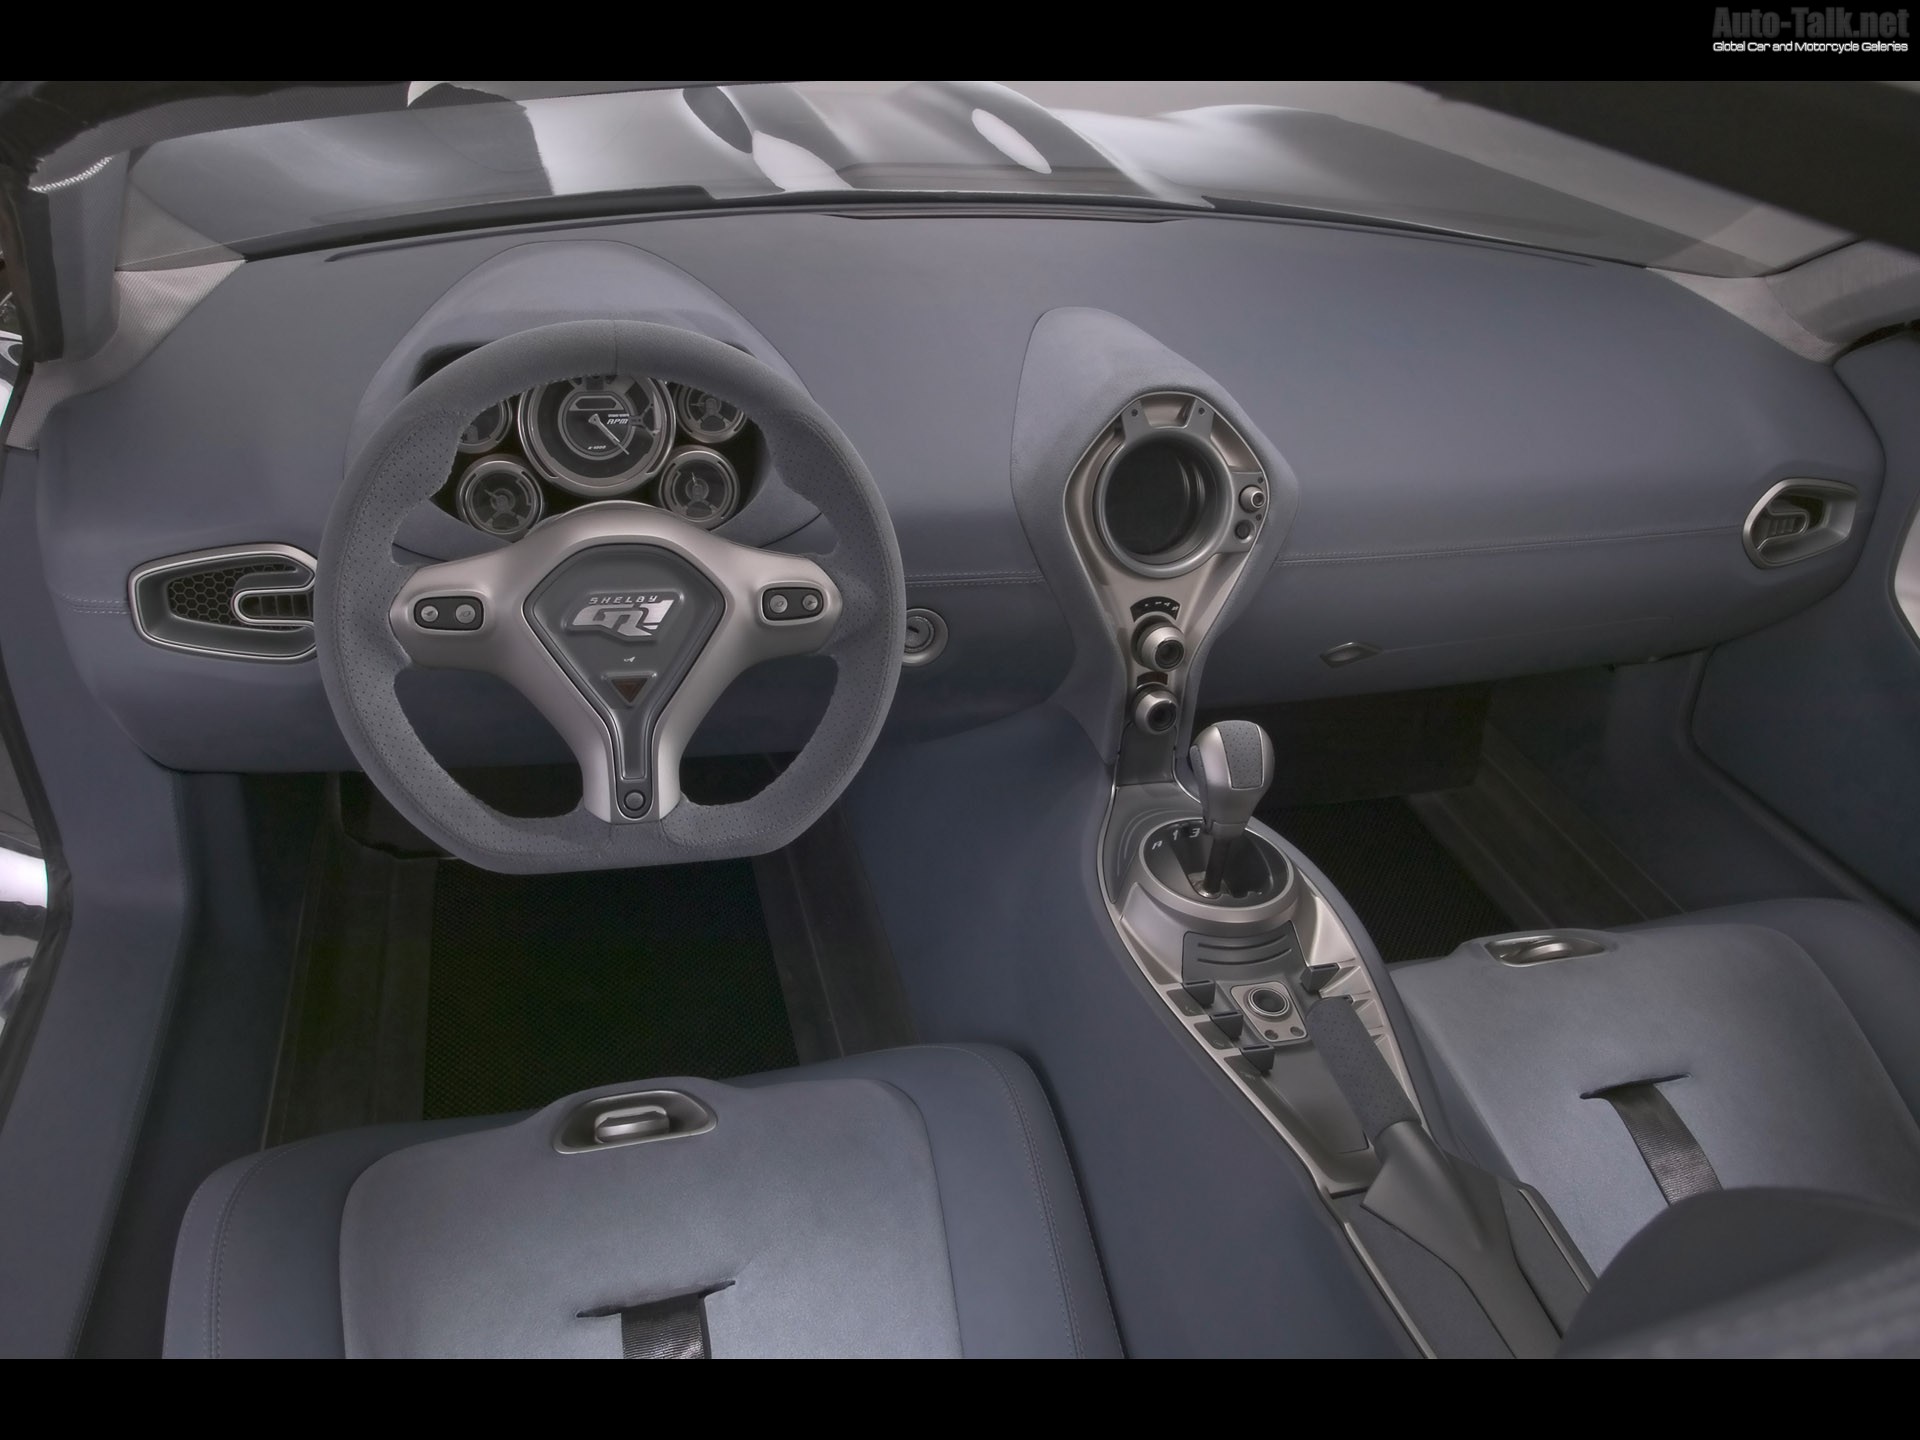 Interior of the 2005 Ford Shelby GR-1 Concept Aluminum